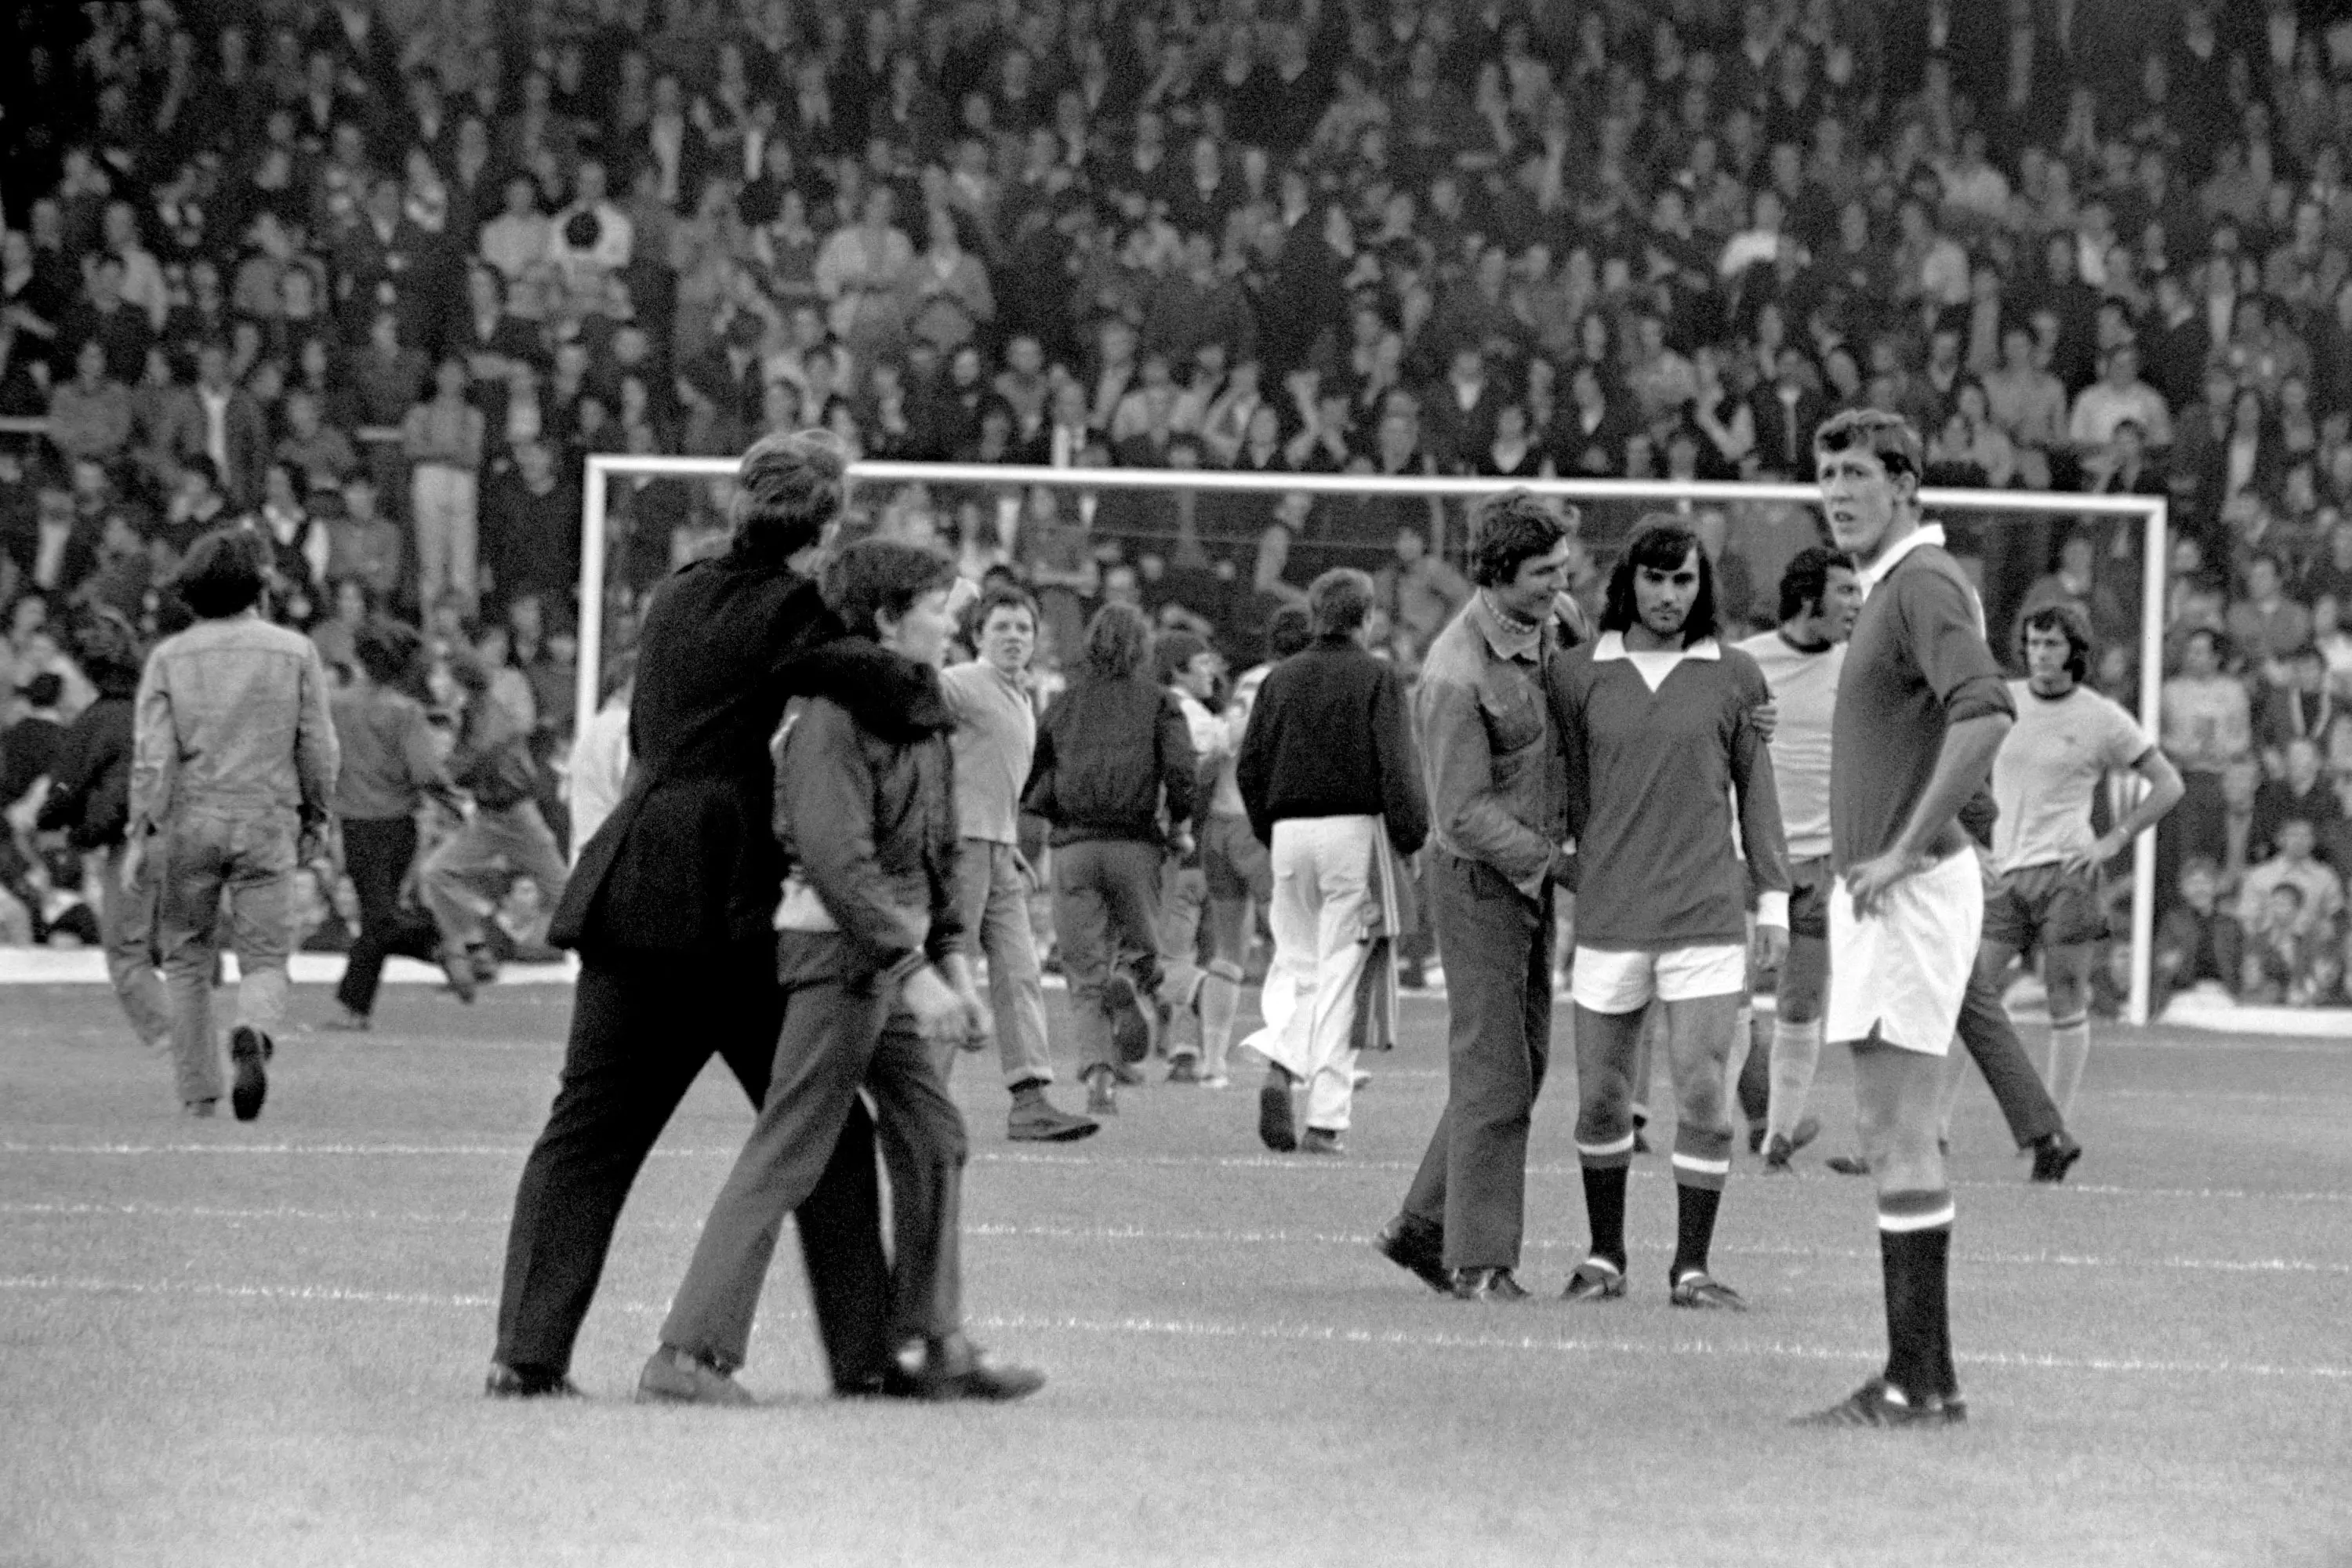 Players, including George Best, look on as fans invade the pitch. Image: PA Images